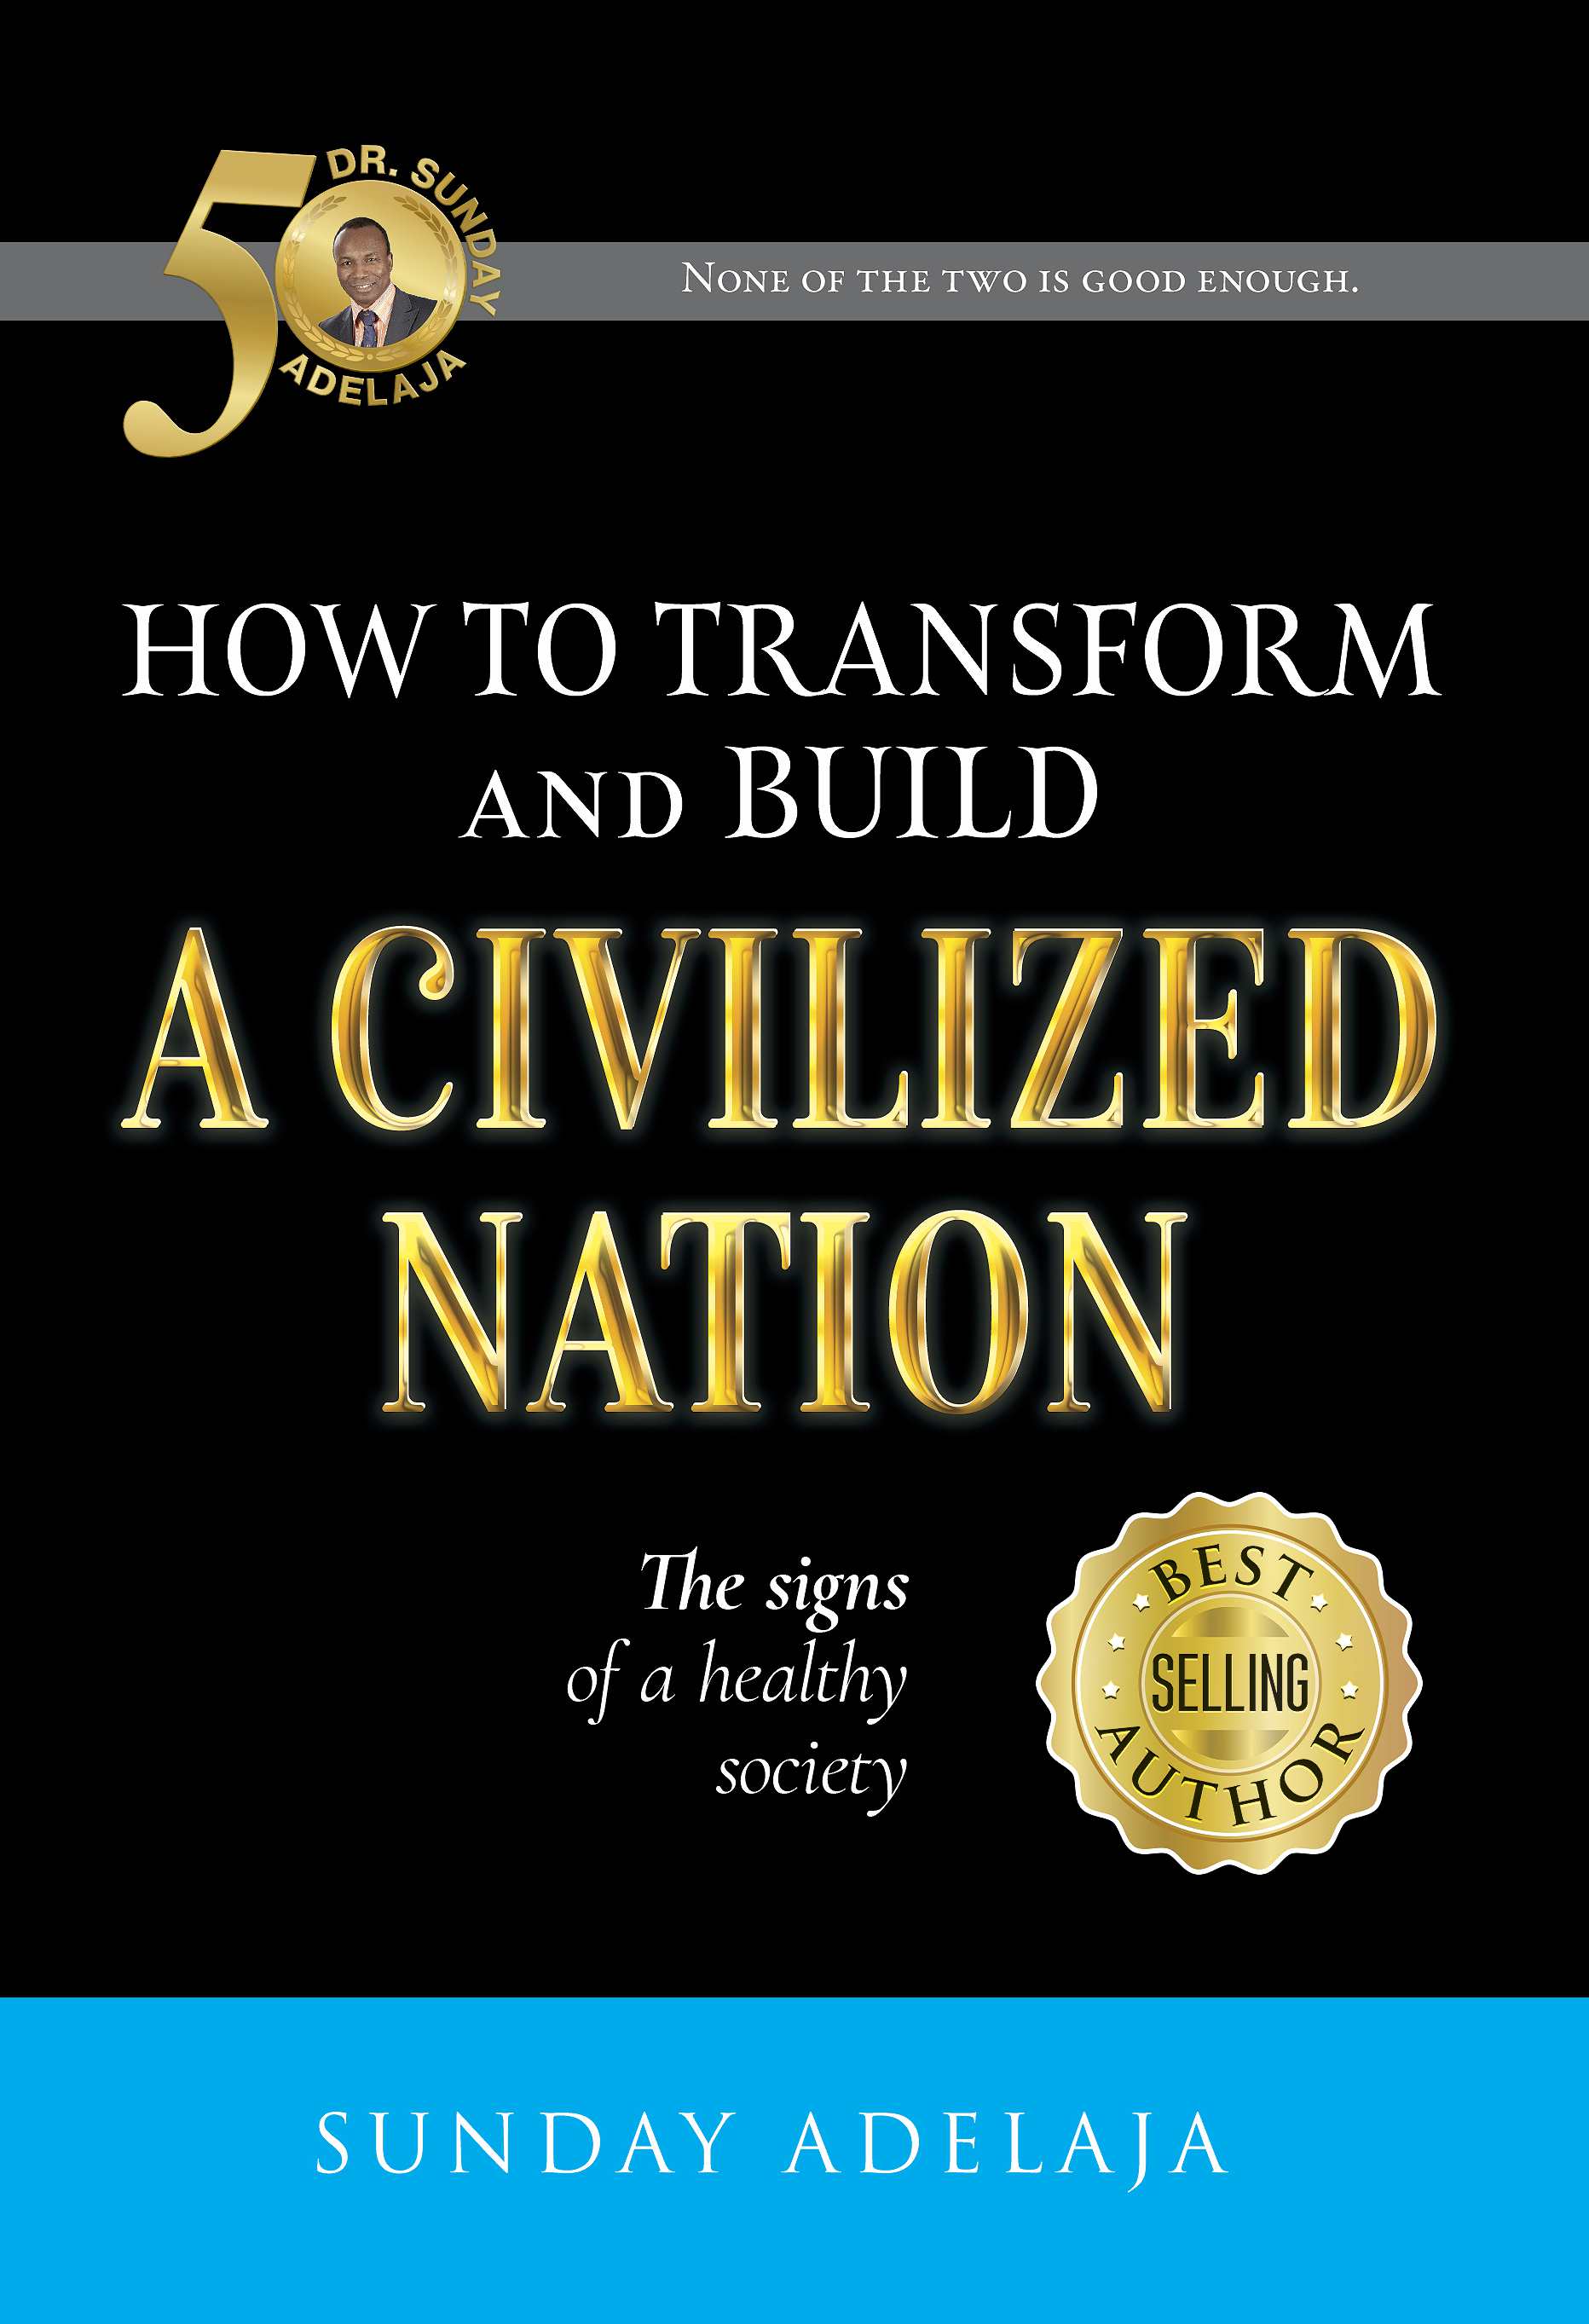 How-to-Transform-and-Build-a-Civilized-Nation